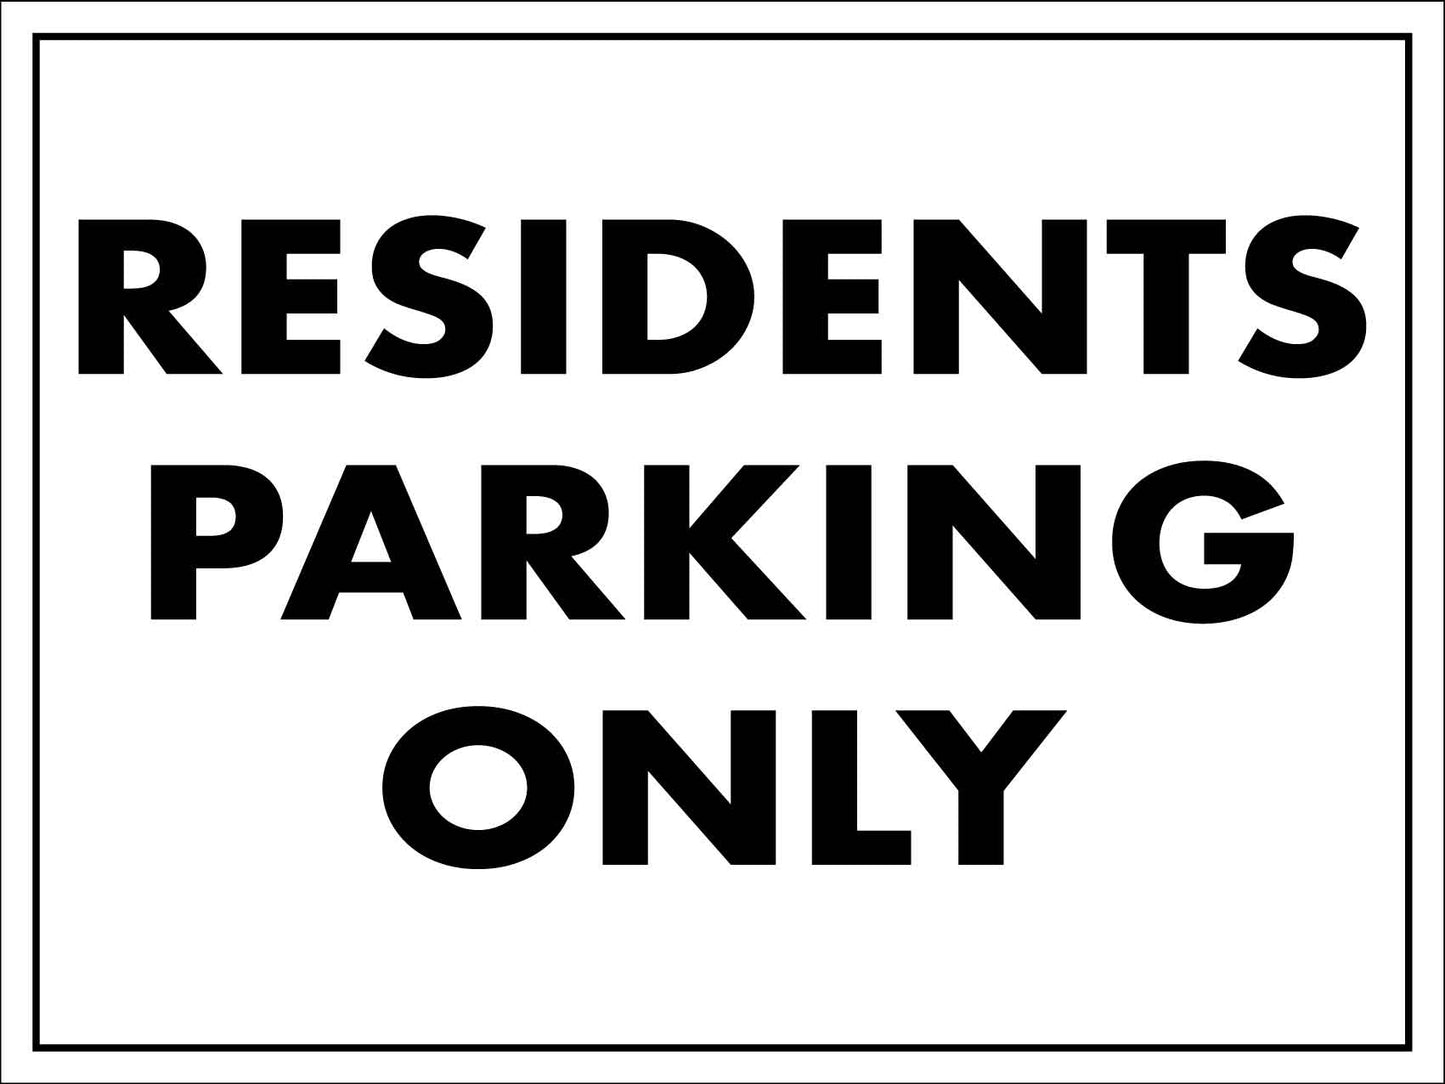 Residents Parking Only Sign